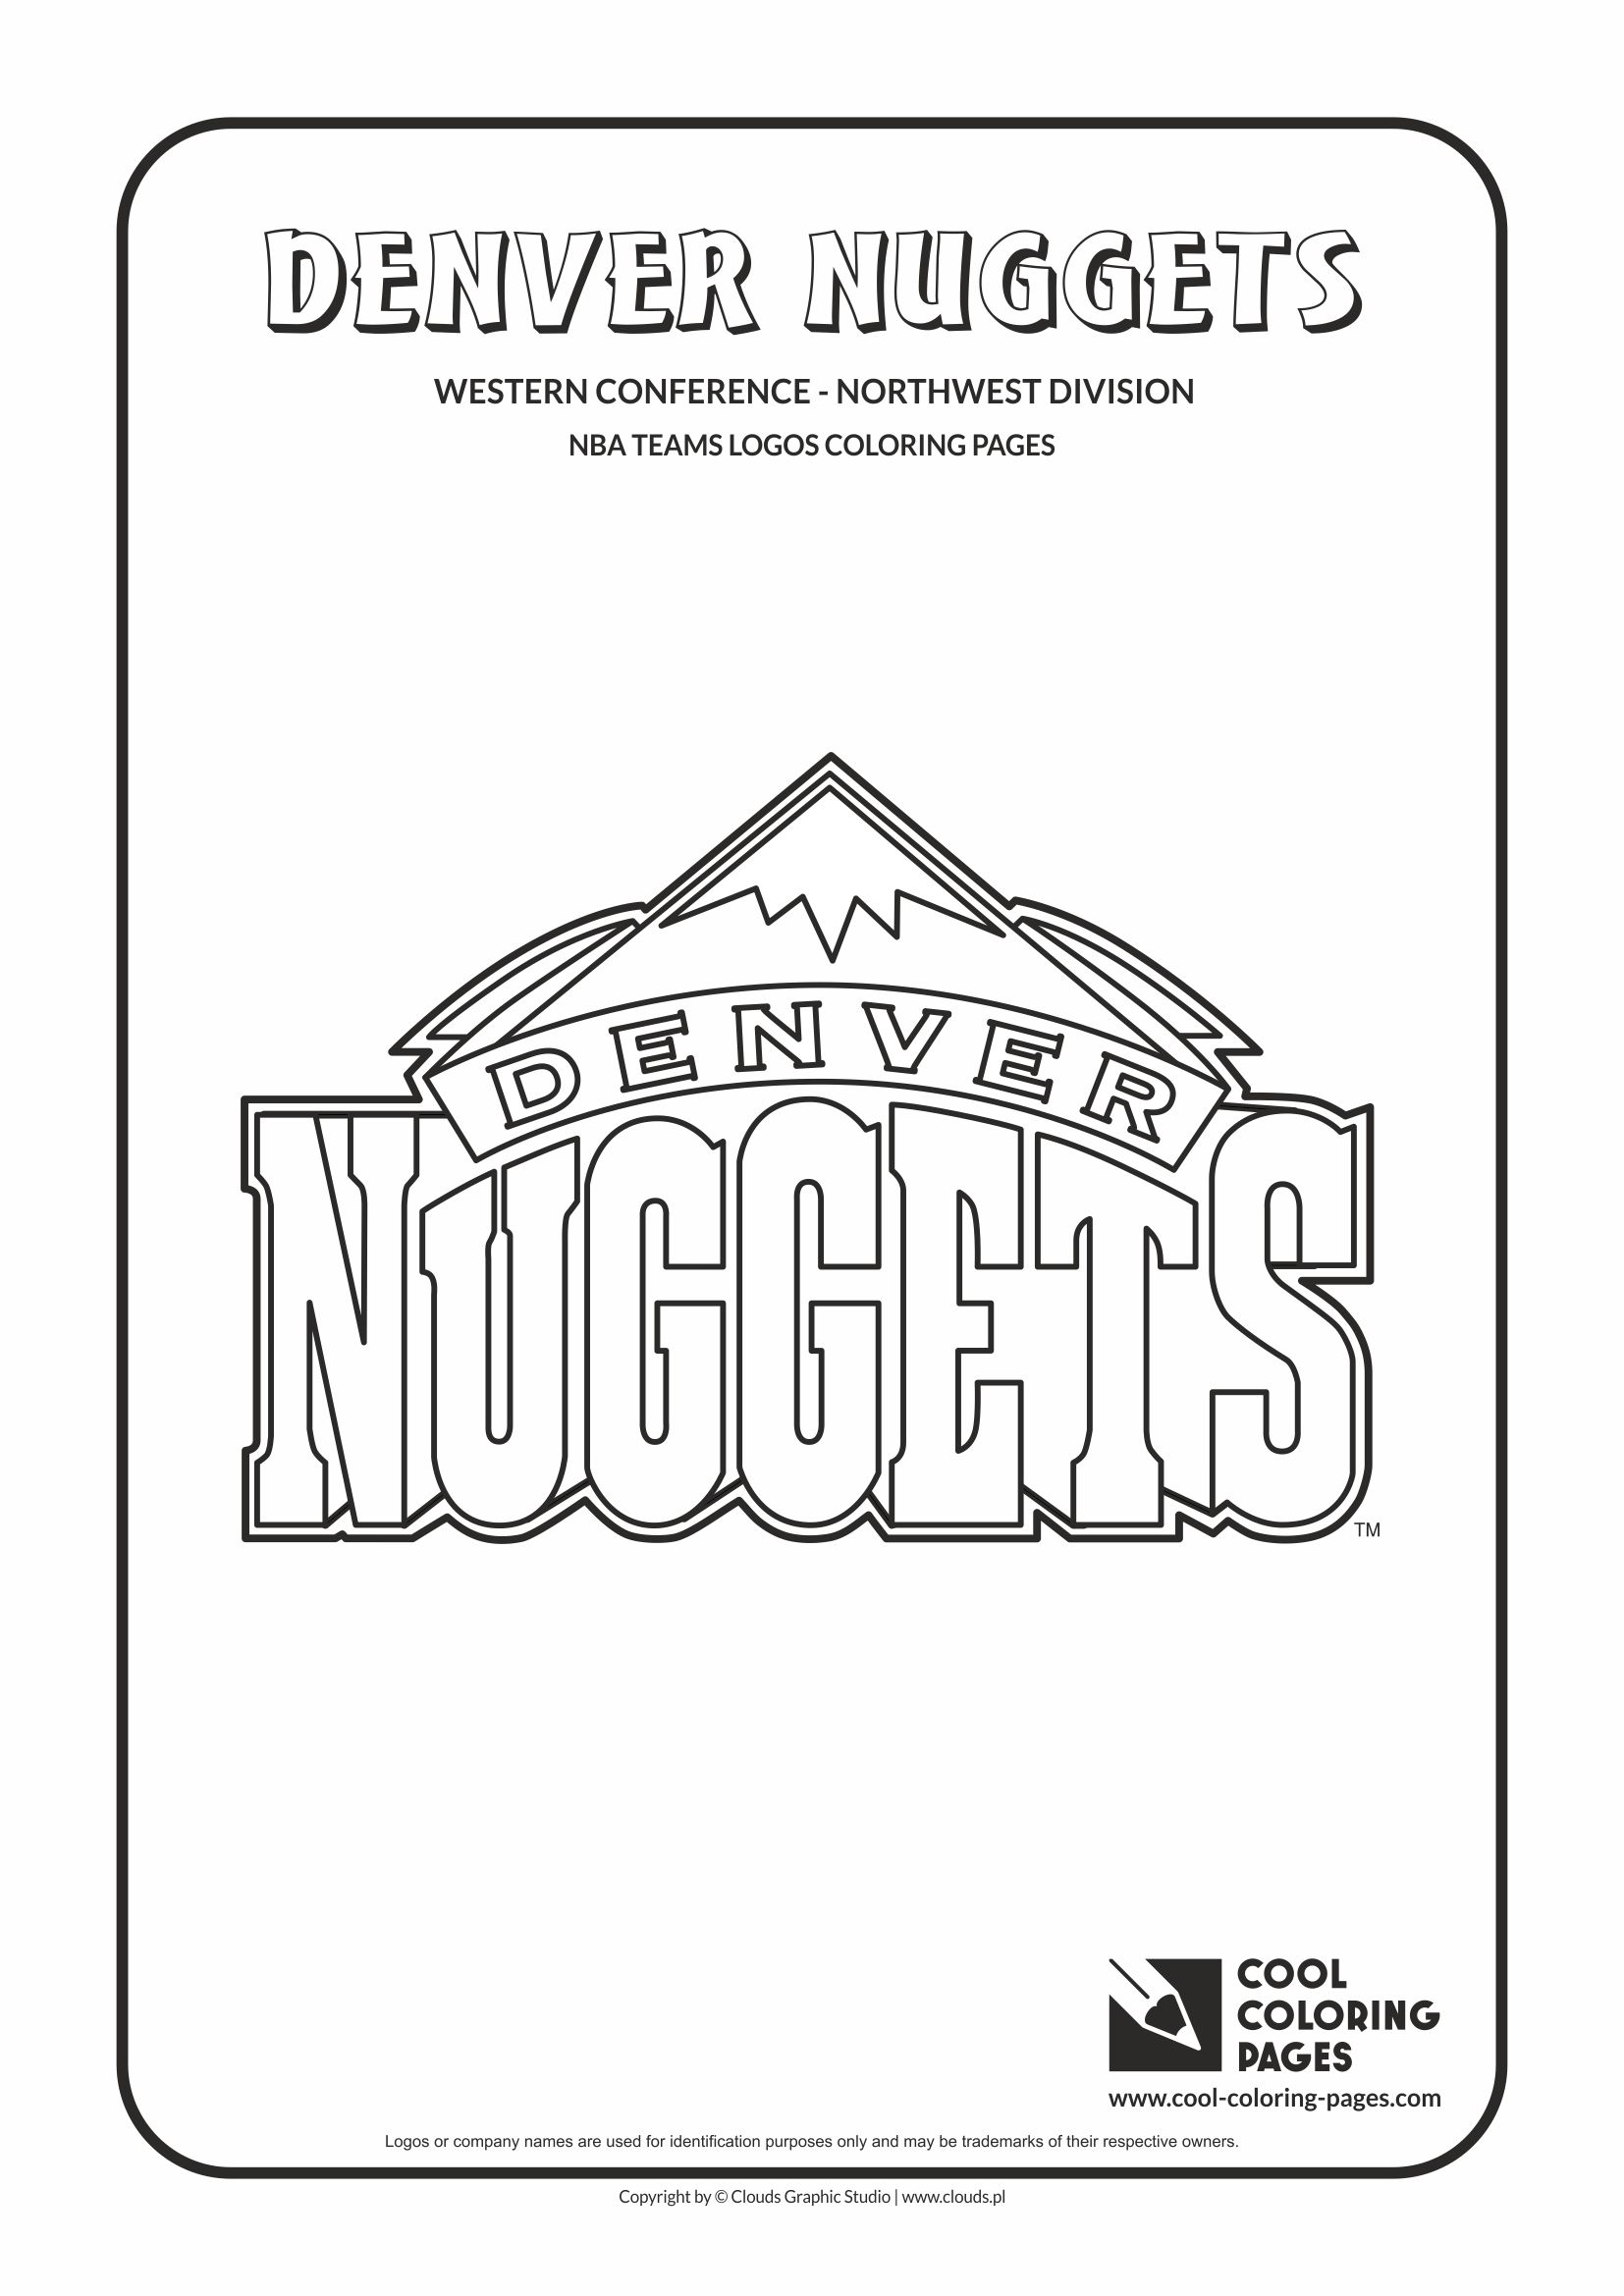 Cool Coloring Pages - NBA Basketball Clubs Logos - Western Conference - Northwest Division / Denver Nuggets logo / Coloring page with Denver Nuggets logo